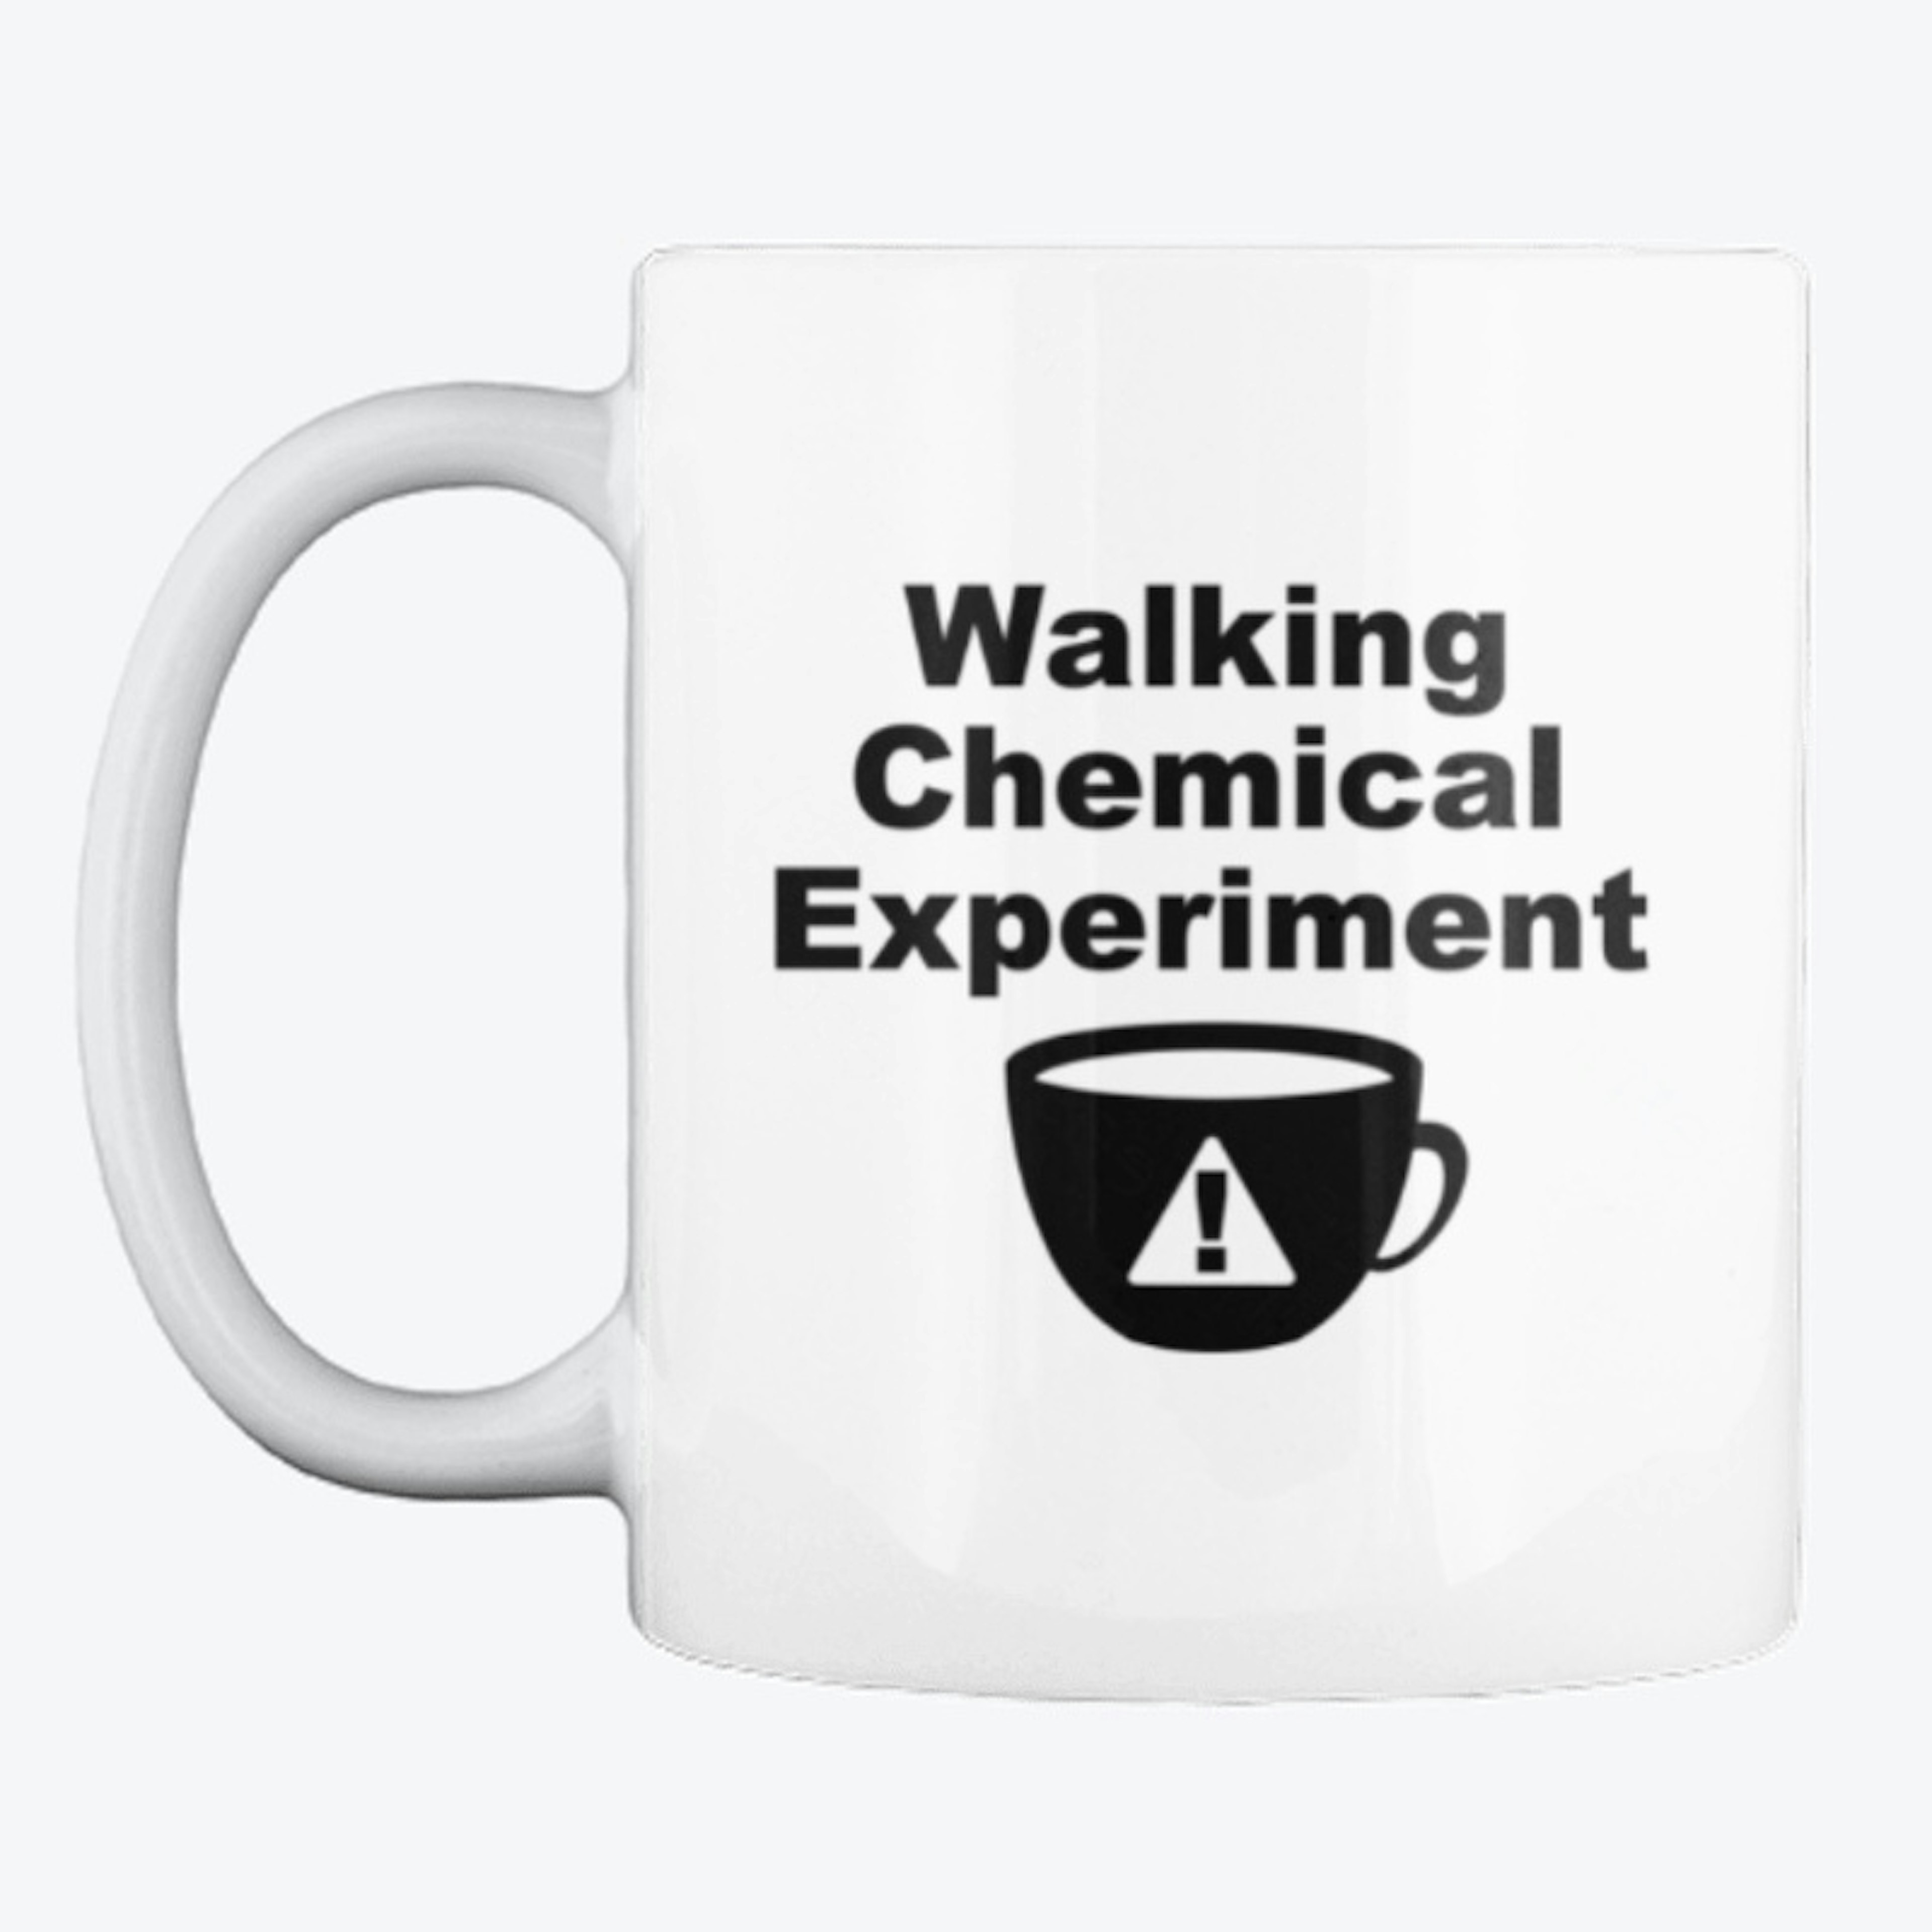 Walking Chemical Experiment